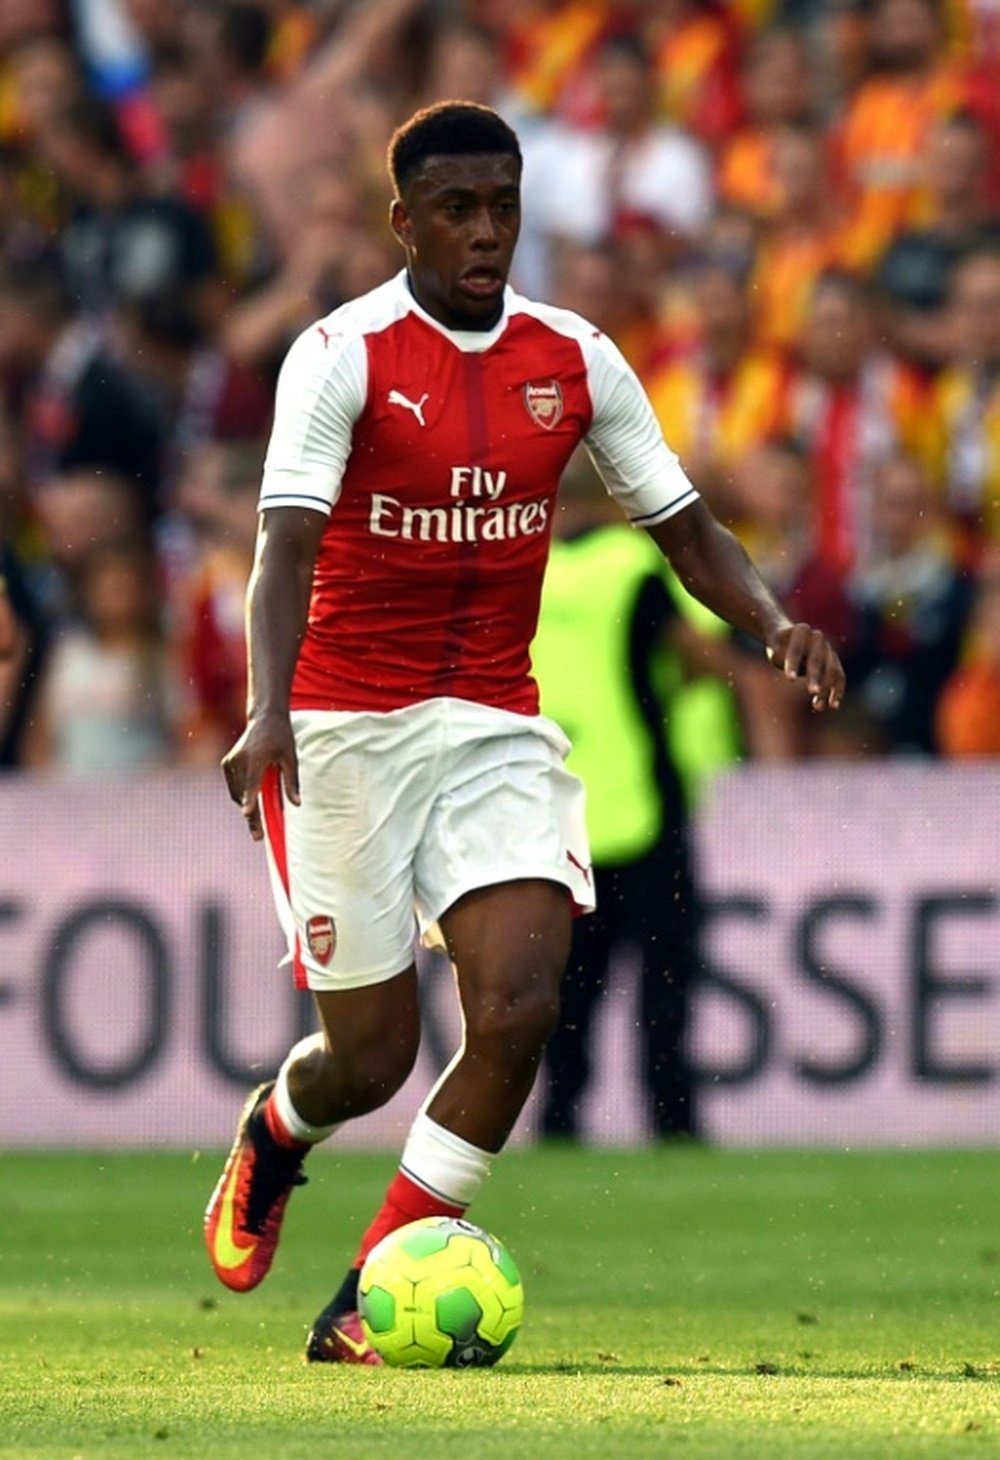 Arsenal will be without forward Danny Welbeck, seen in July 2016, for the match against Bournemouth due to knee injuries